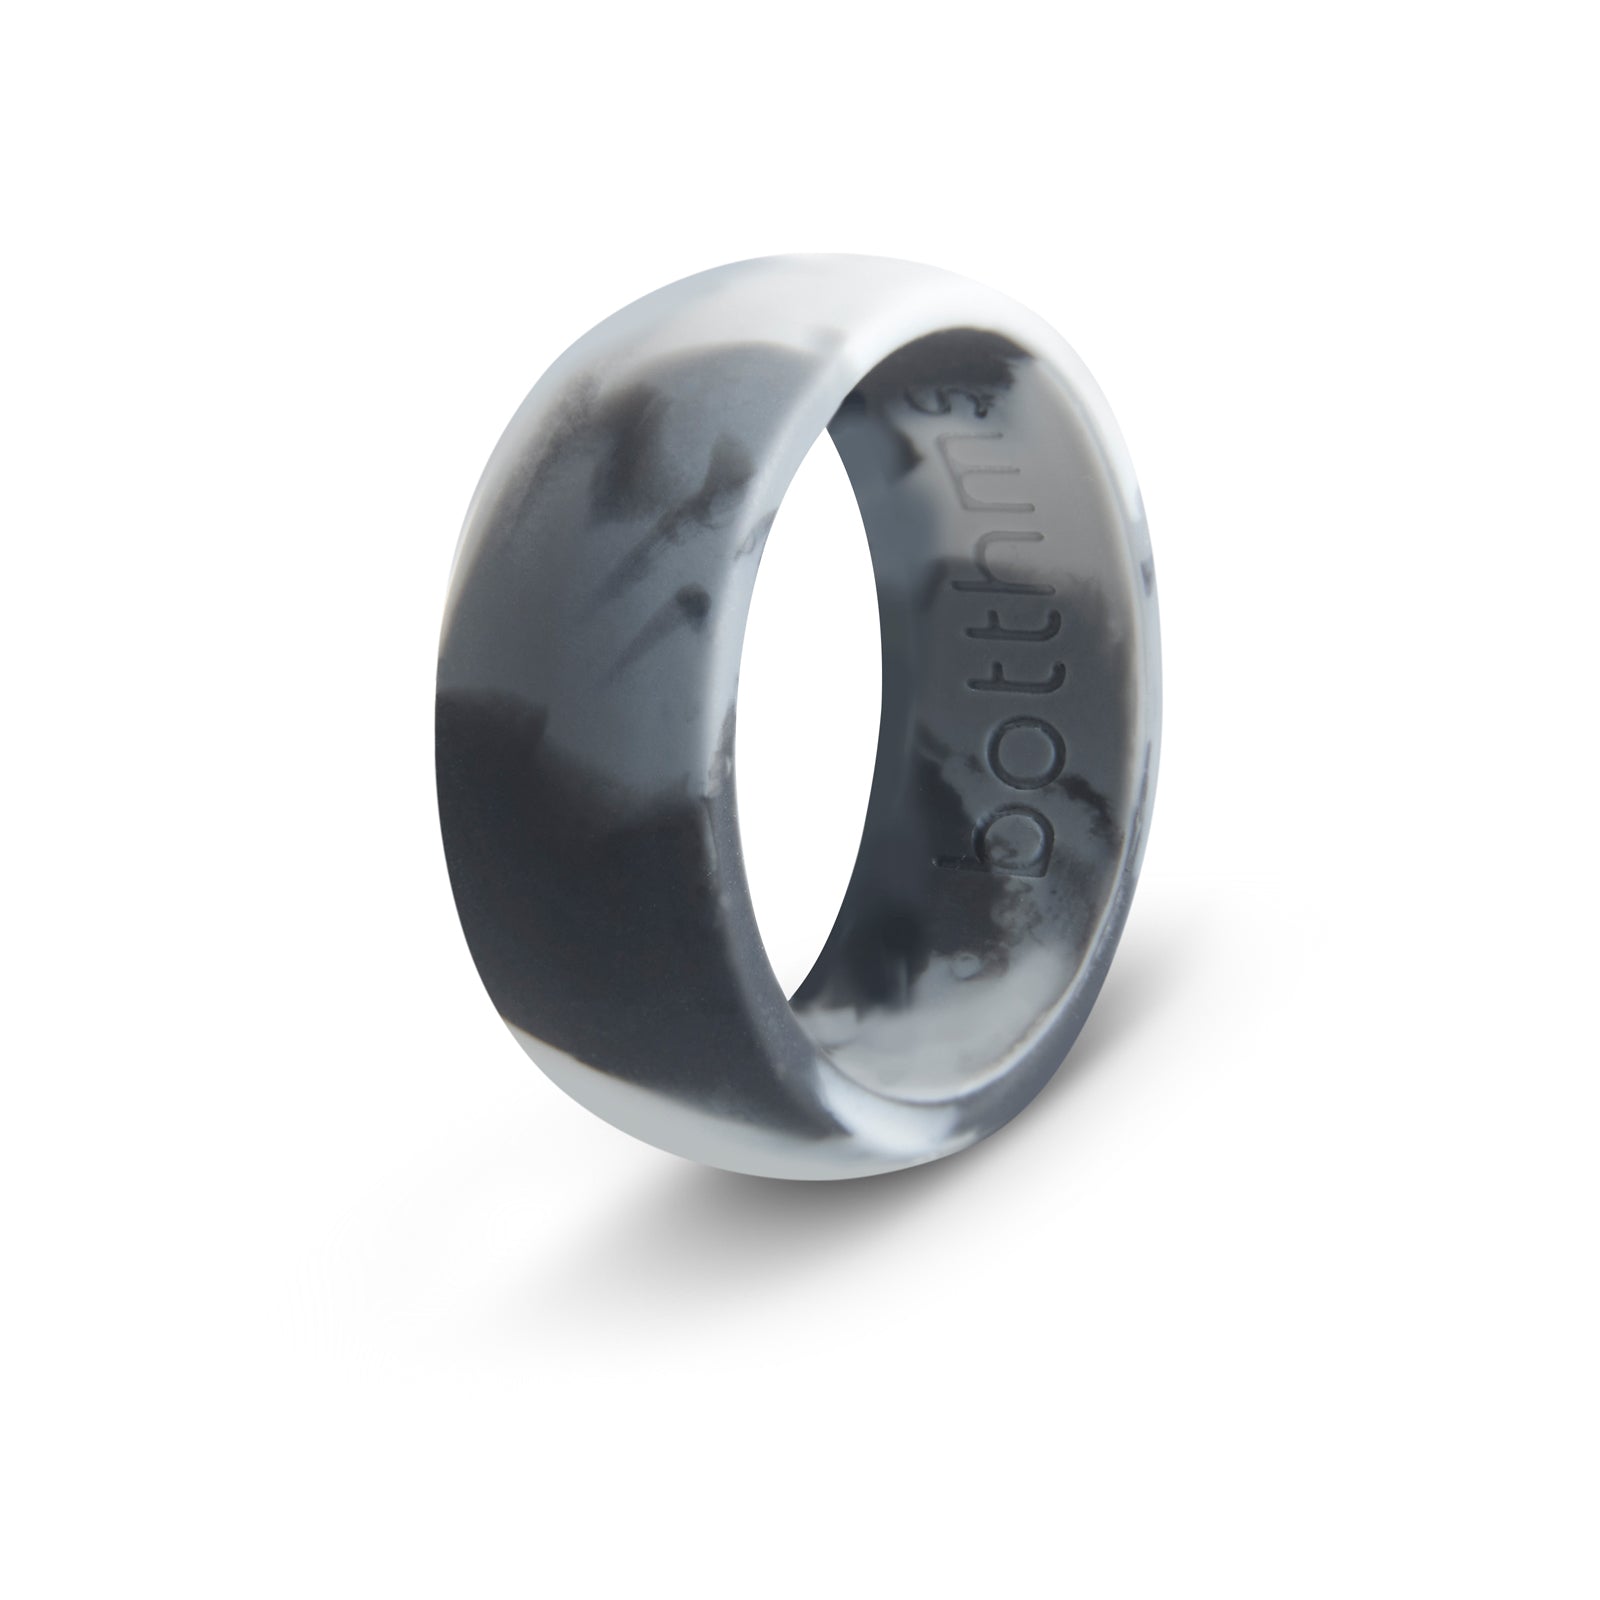 botthms botthms Army Flow Silicone Ring Black & Grey Silicone Rings